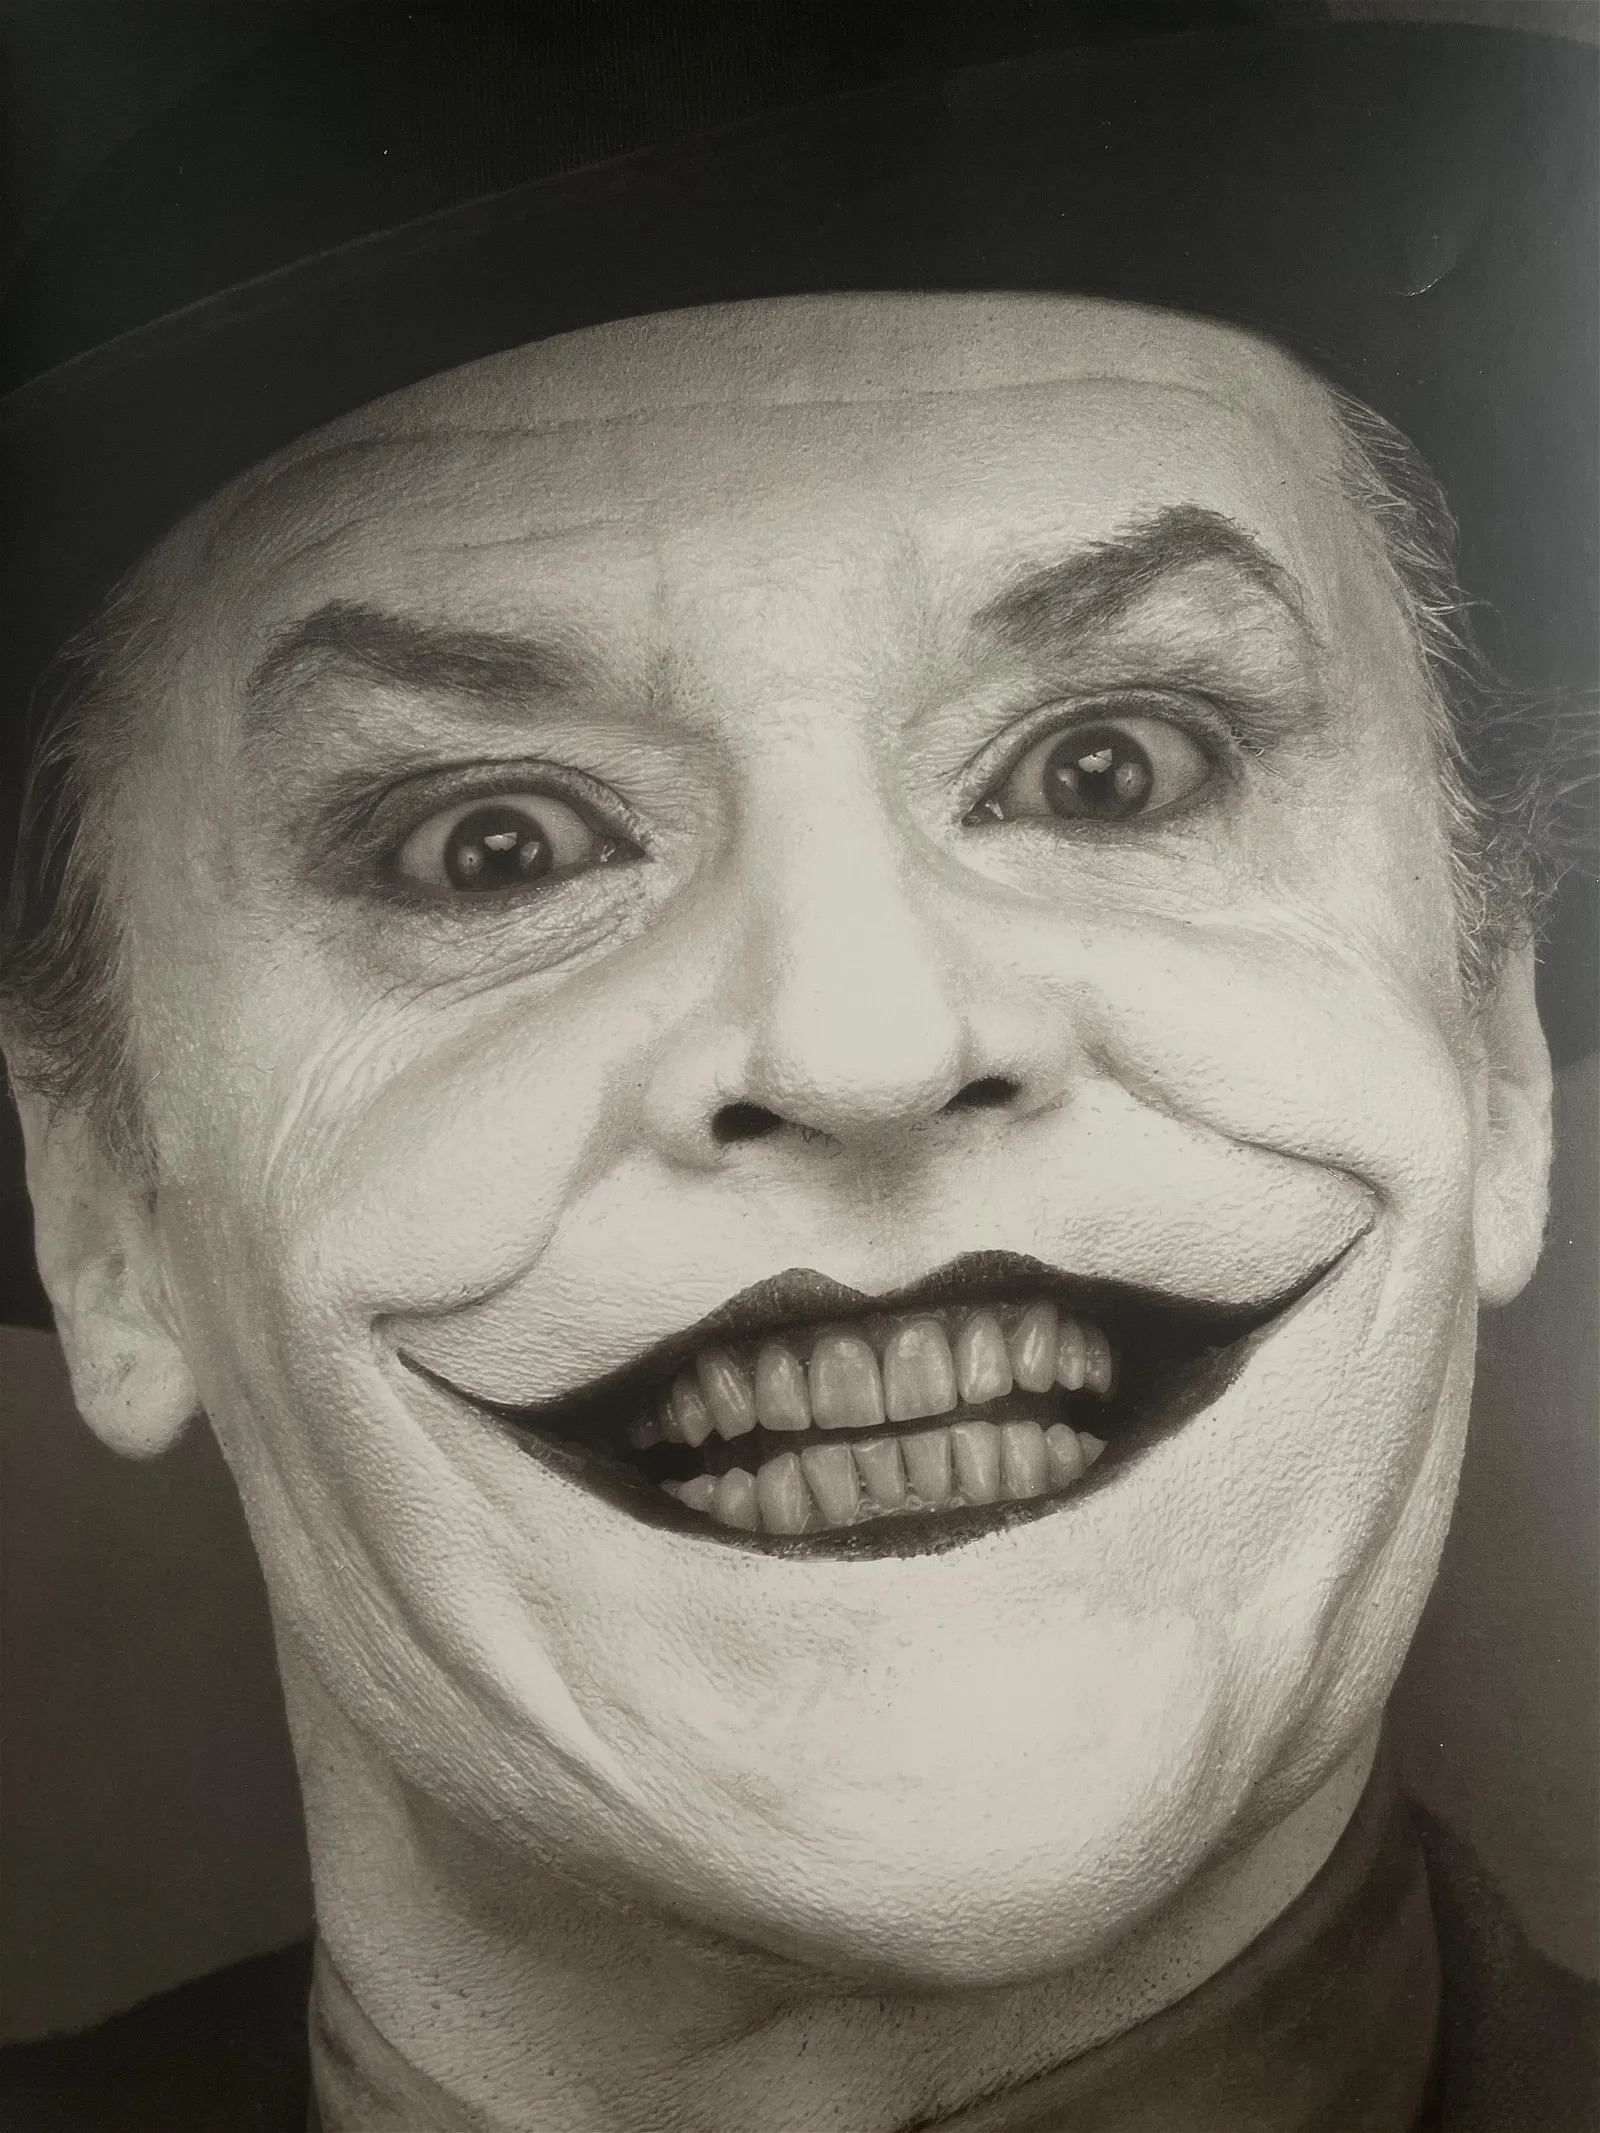 Lot of Four Herb Ritts "Jack Nicholson, London, 1988" Prints - Image 3 of 4